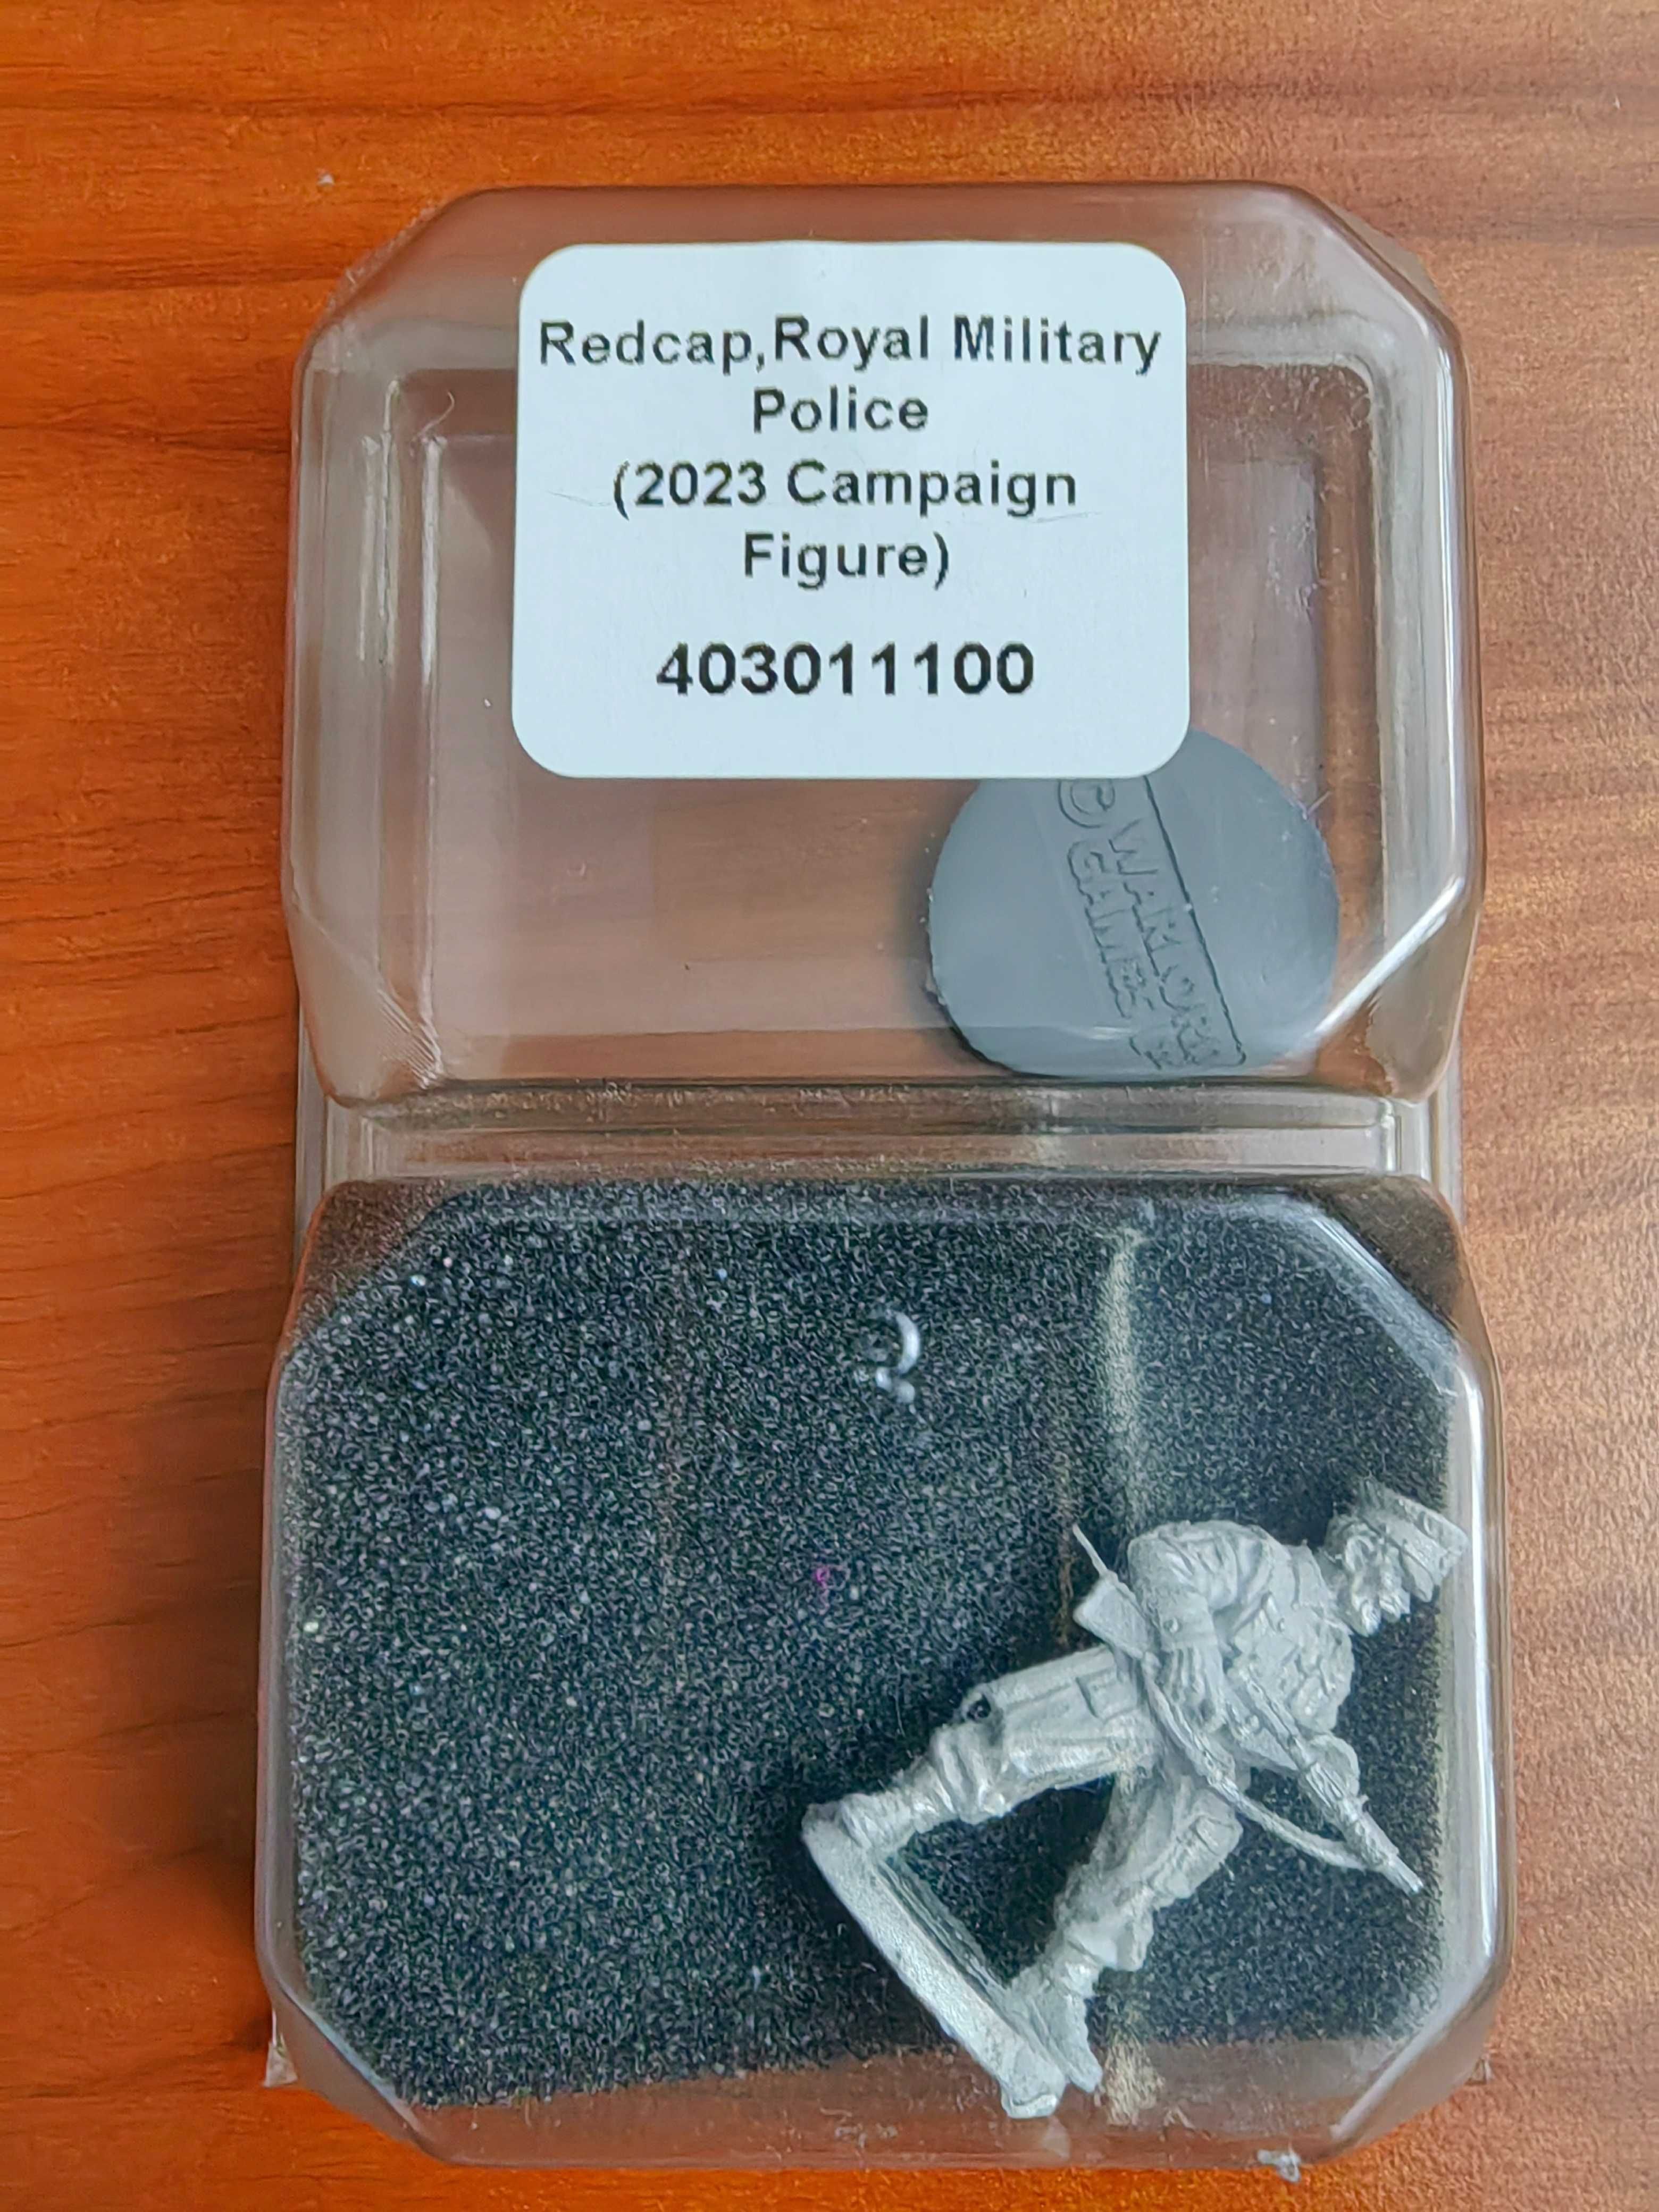 Bolt Action Redcap Royal Military 2023 Campaign limited edition figure